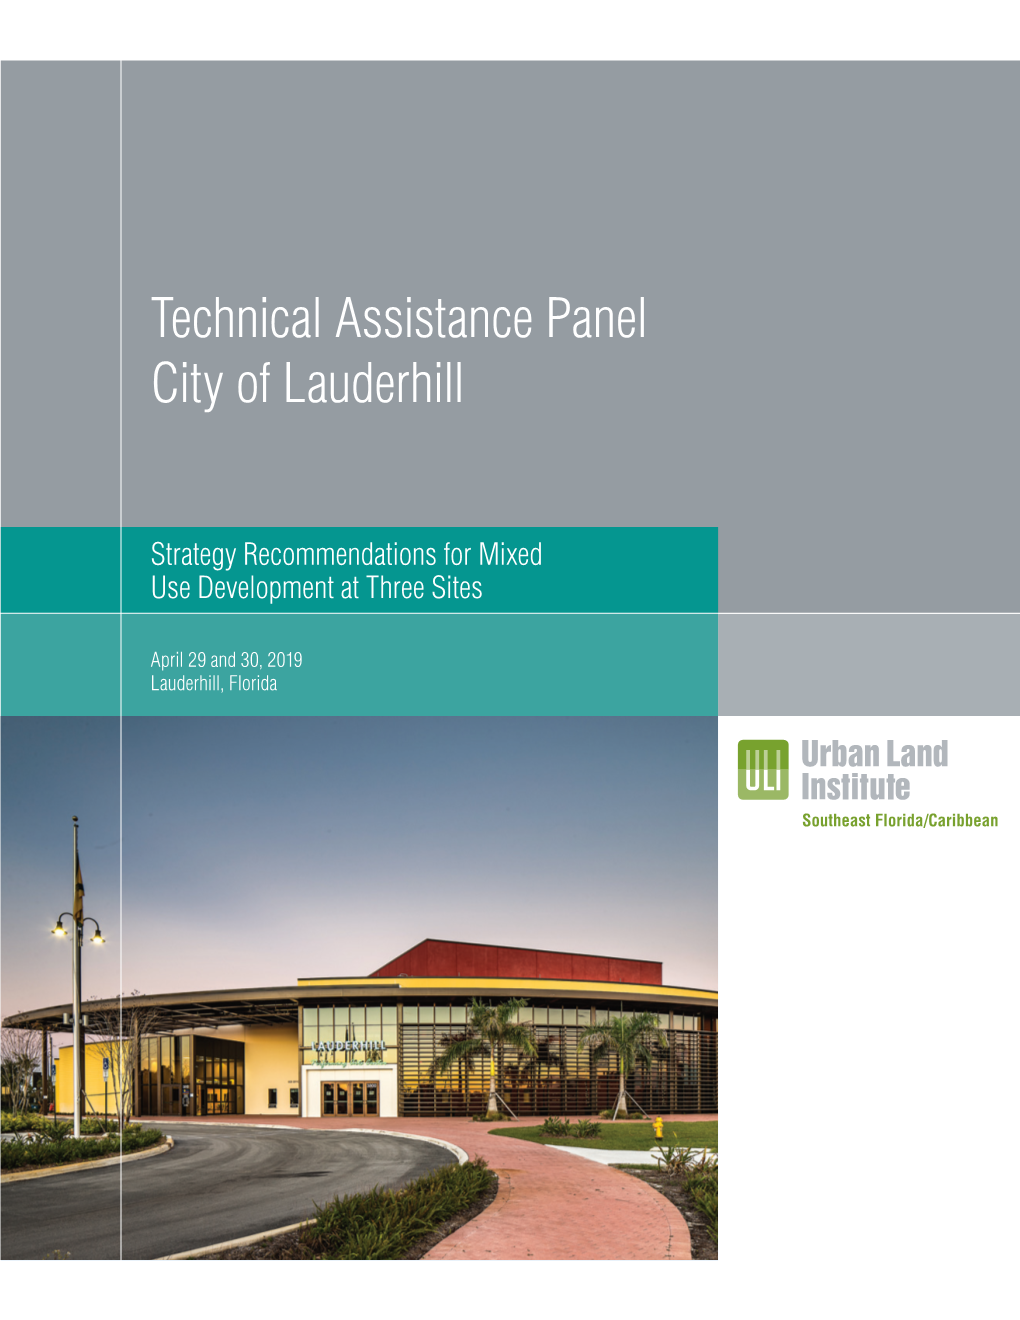 Technical Assistance Panel City of Lauderhill